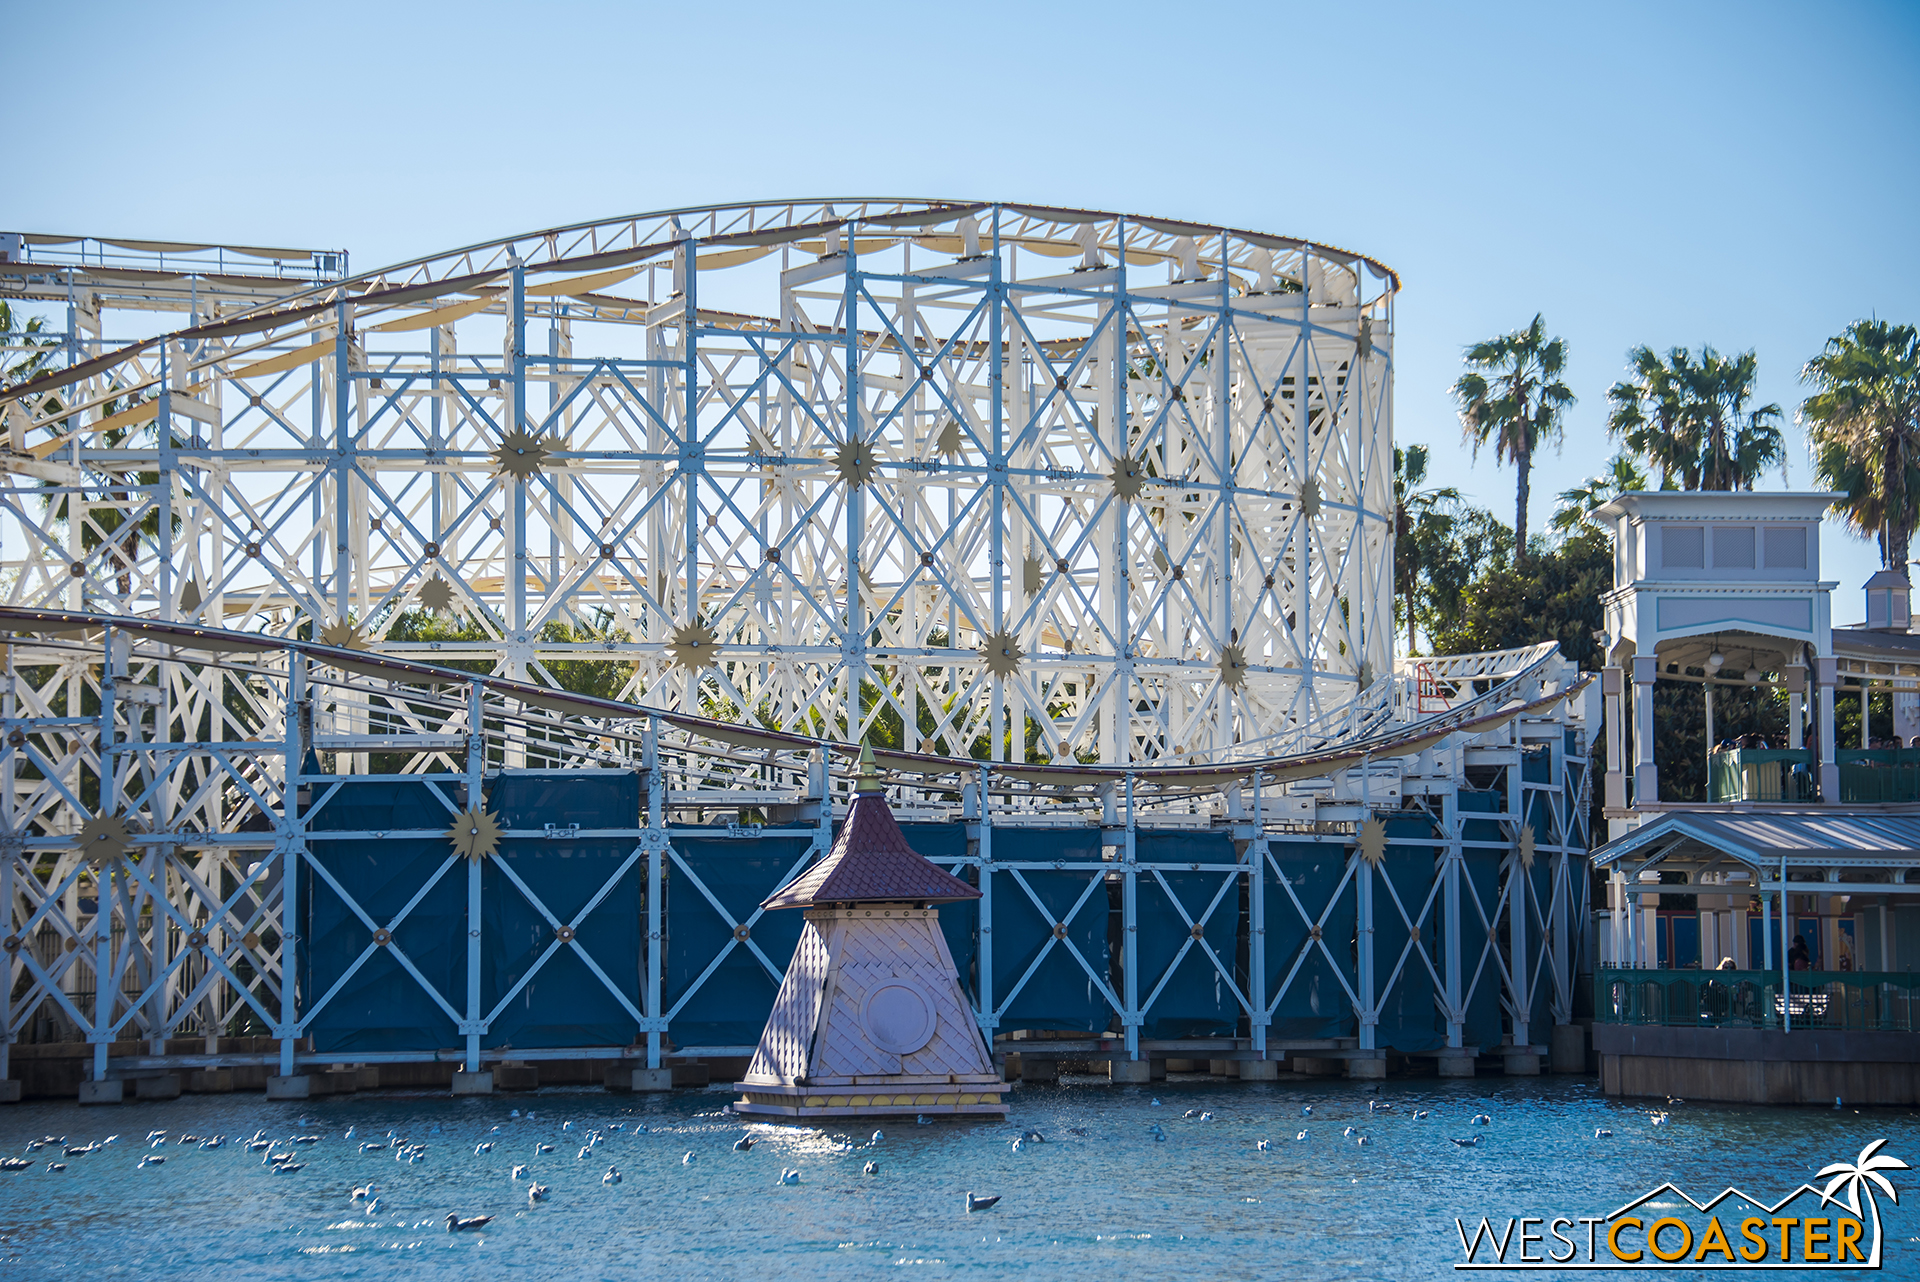  The area of renovation extends to this far turnaround of Screamin'.&nbsp; Per Disney Park Blogs, this area will be the fourth of the four Pixar Pier "neighborhoods," to be devoted to the movie,  Inside Out .&nbsp; But the new attraction to be placed